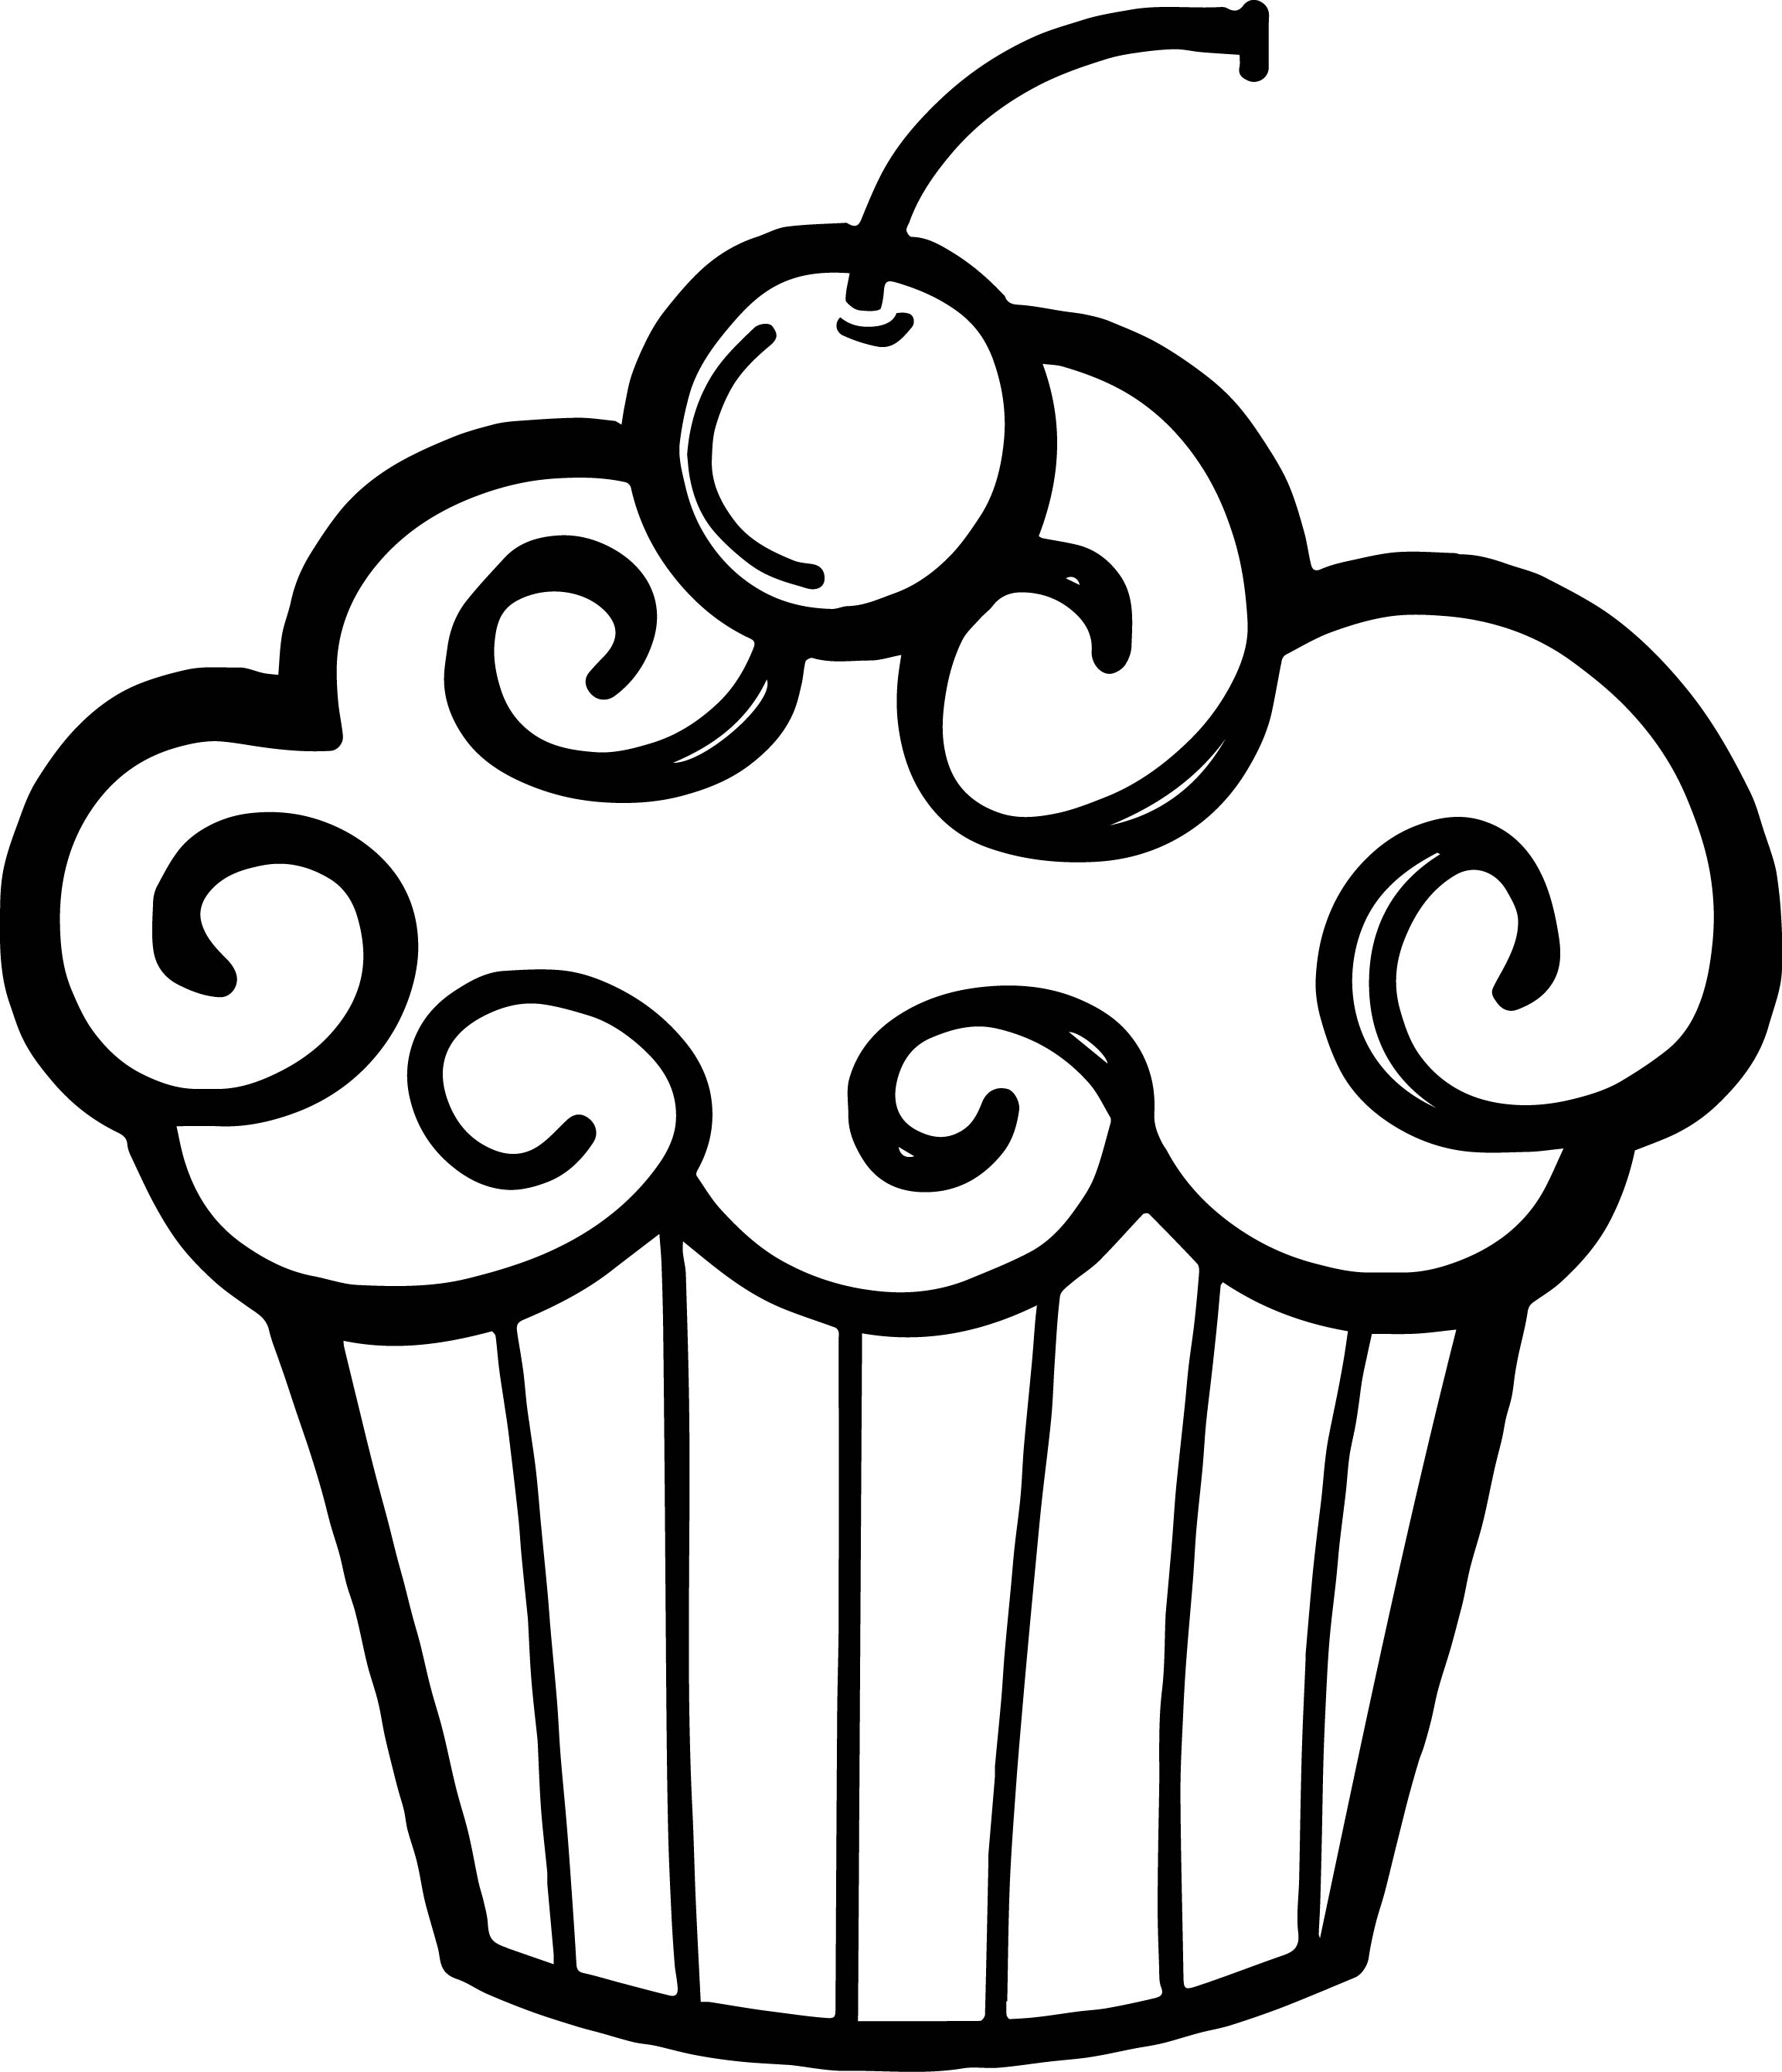 Cupcake  black and white image of birthday clipart black and white happy